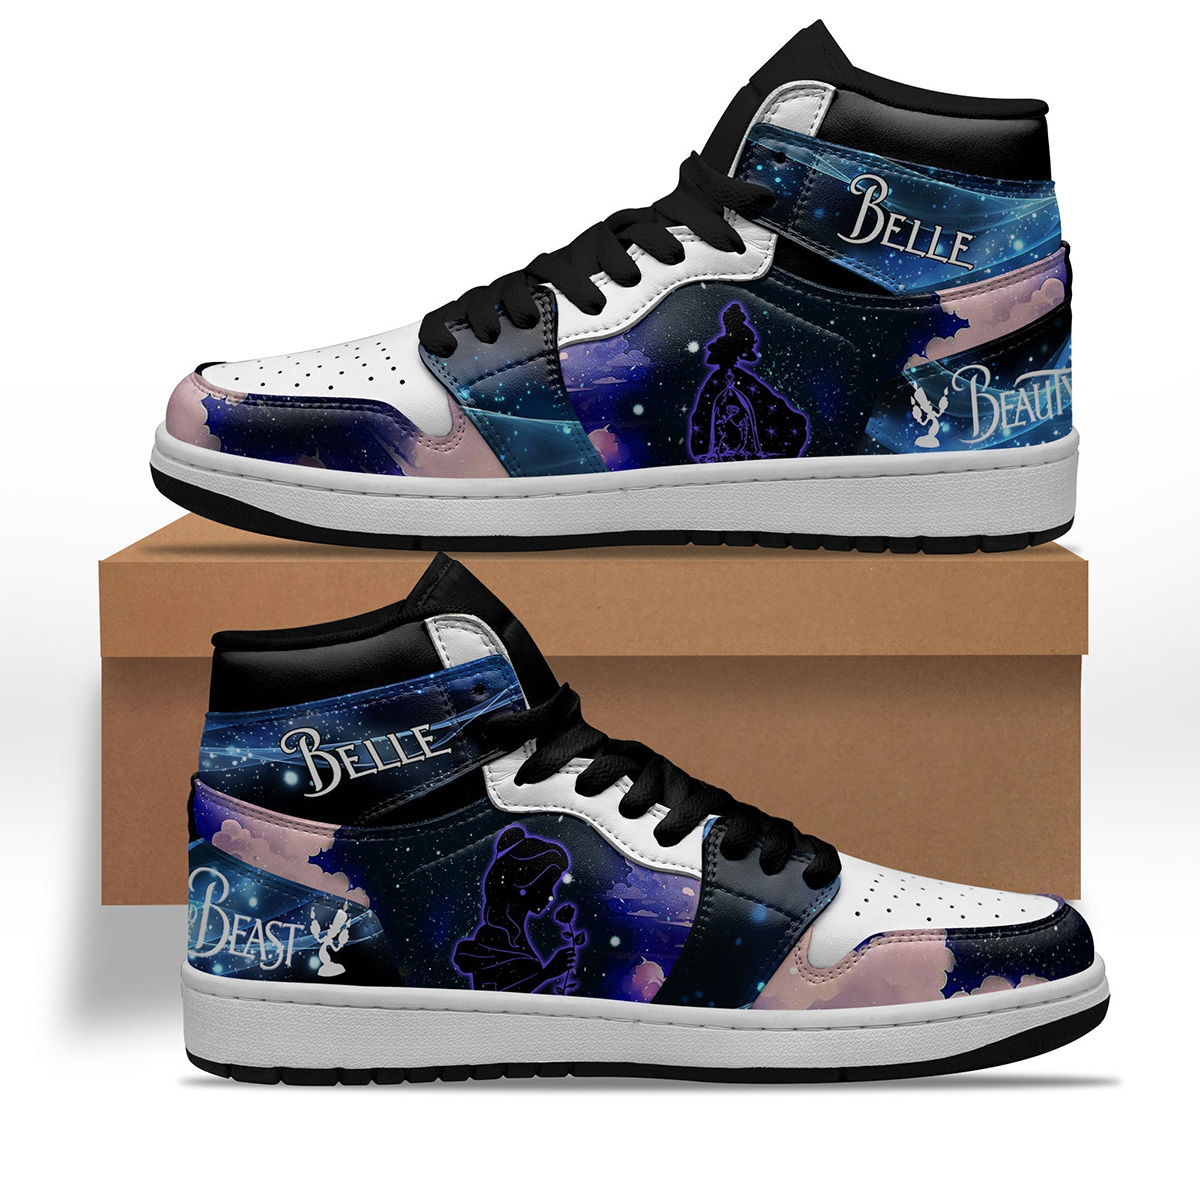 Belle Silhouette Shoes Custom For Fans Sneakers